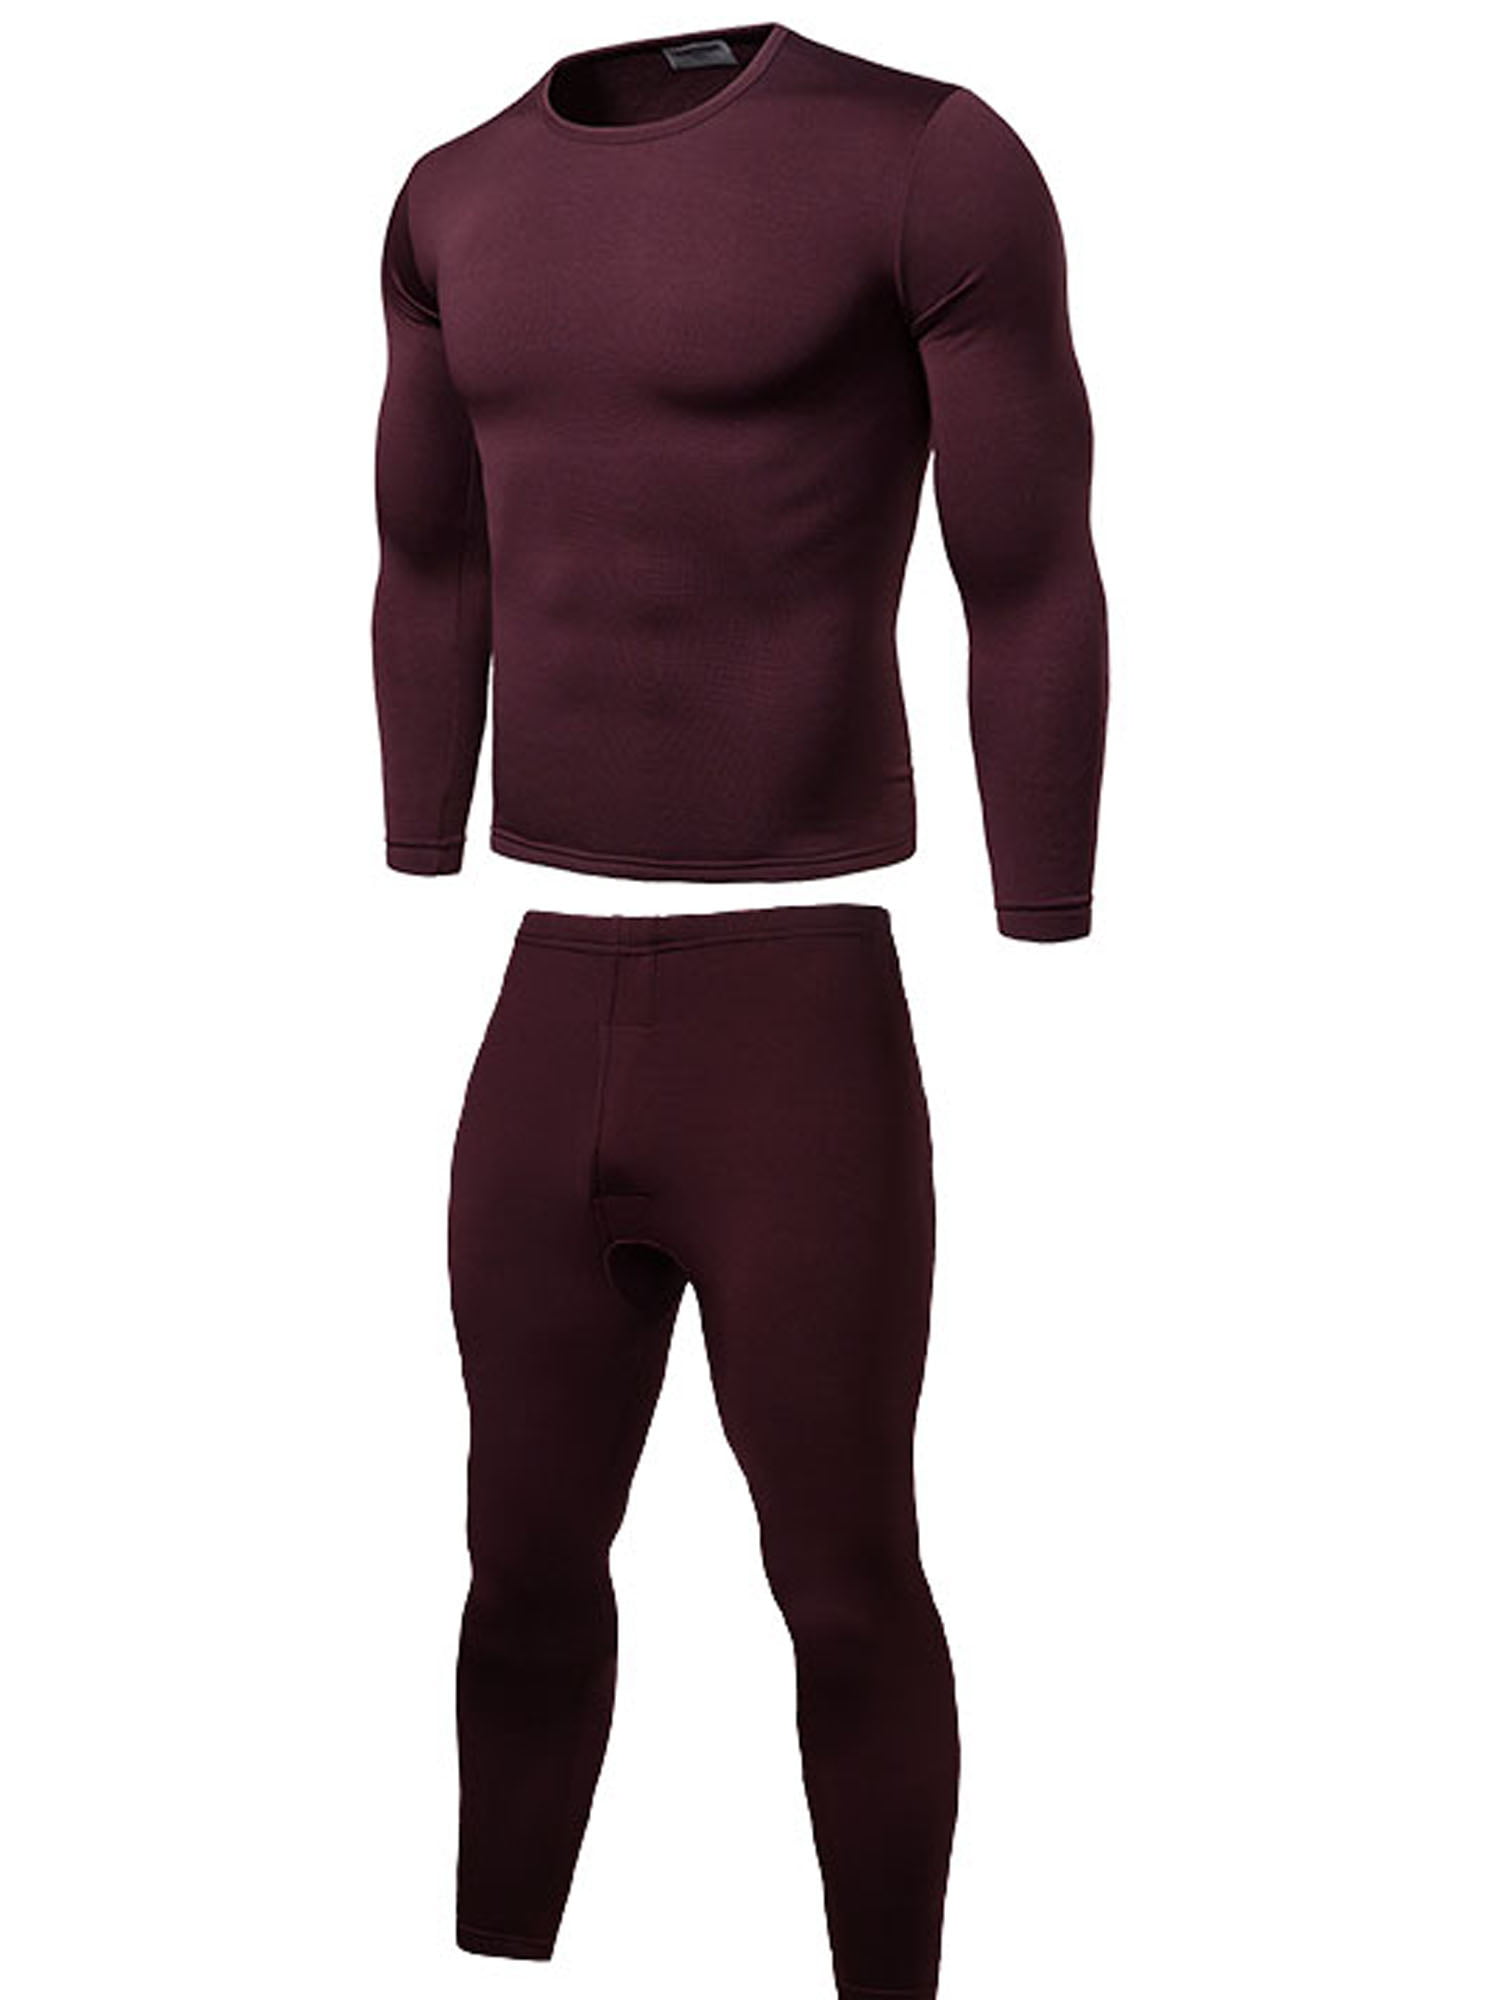  Thermal Long Sleeve Tops For Women Workout Shirts Running  Gear Clothes Underwear Fleece Lined Undershirts Basic Fitted Cold Weather  Maroon XXL